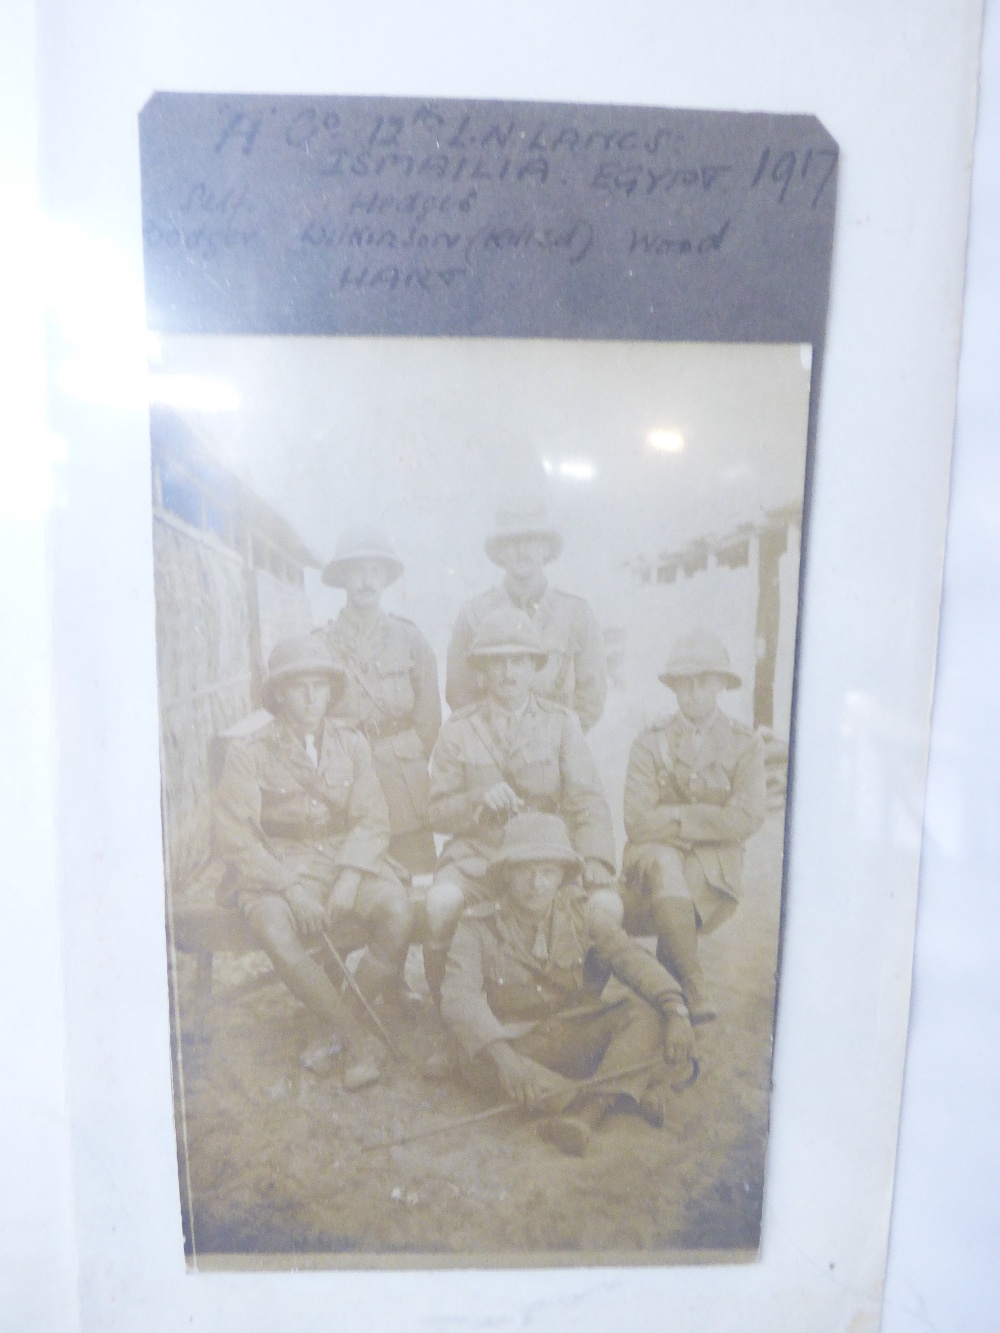 FRAMED MILITARY COLLECTION OF MEMENTOES - Image 7 of 7